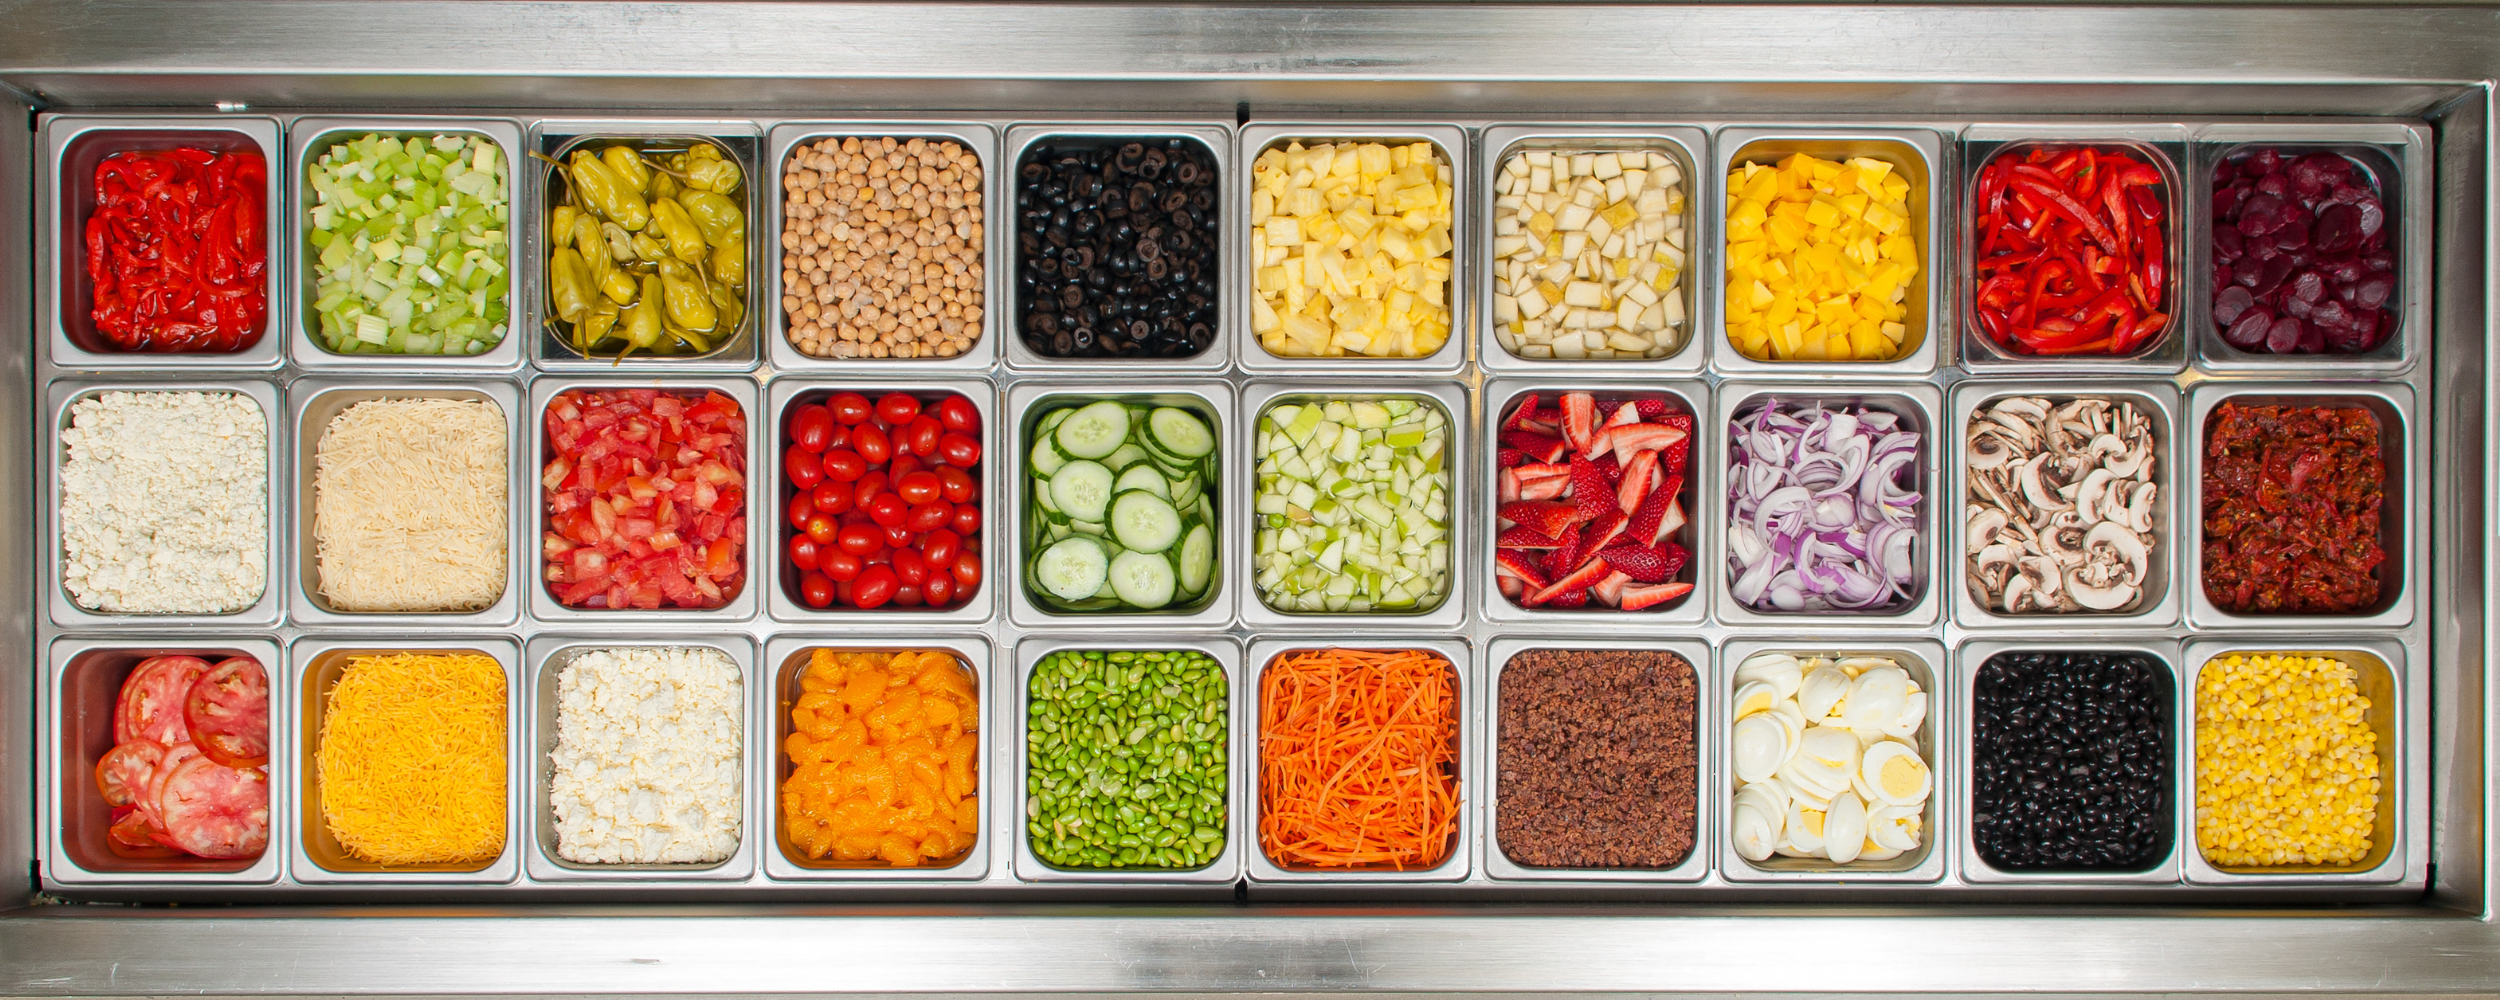 1/6 size food pans used to make a salad bar